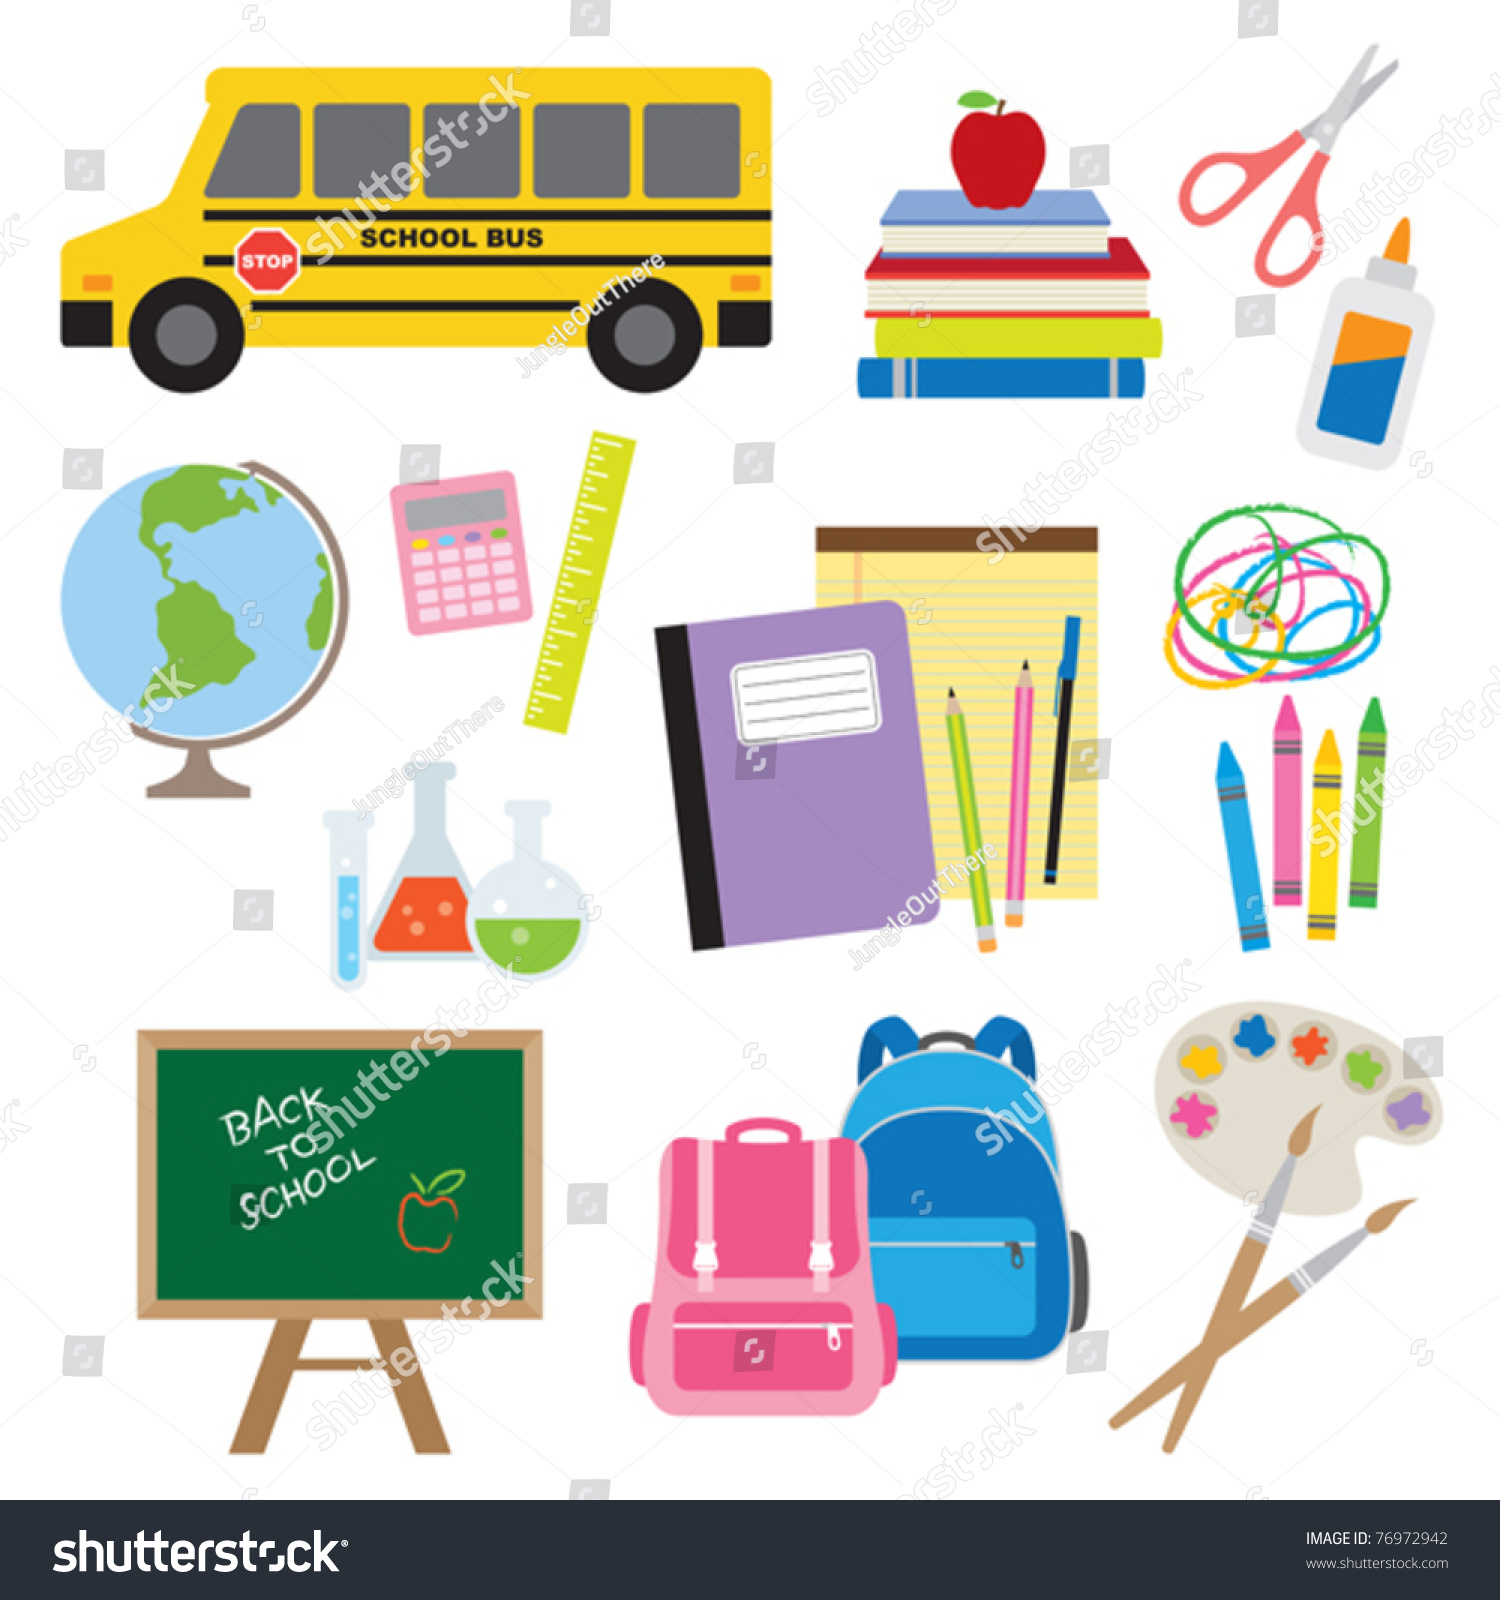 clipart of back to school supplies - photo #22